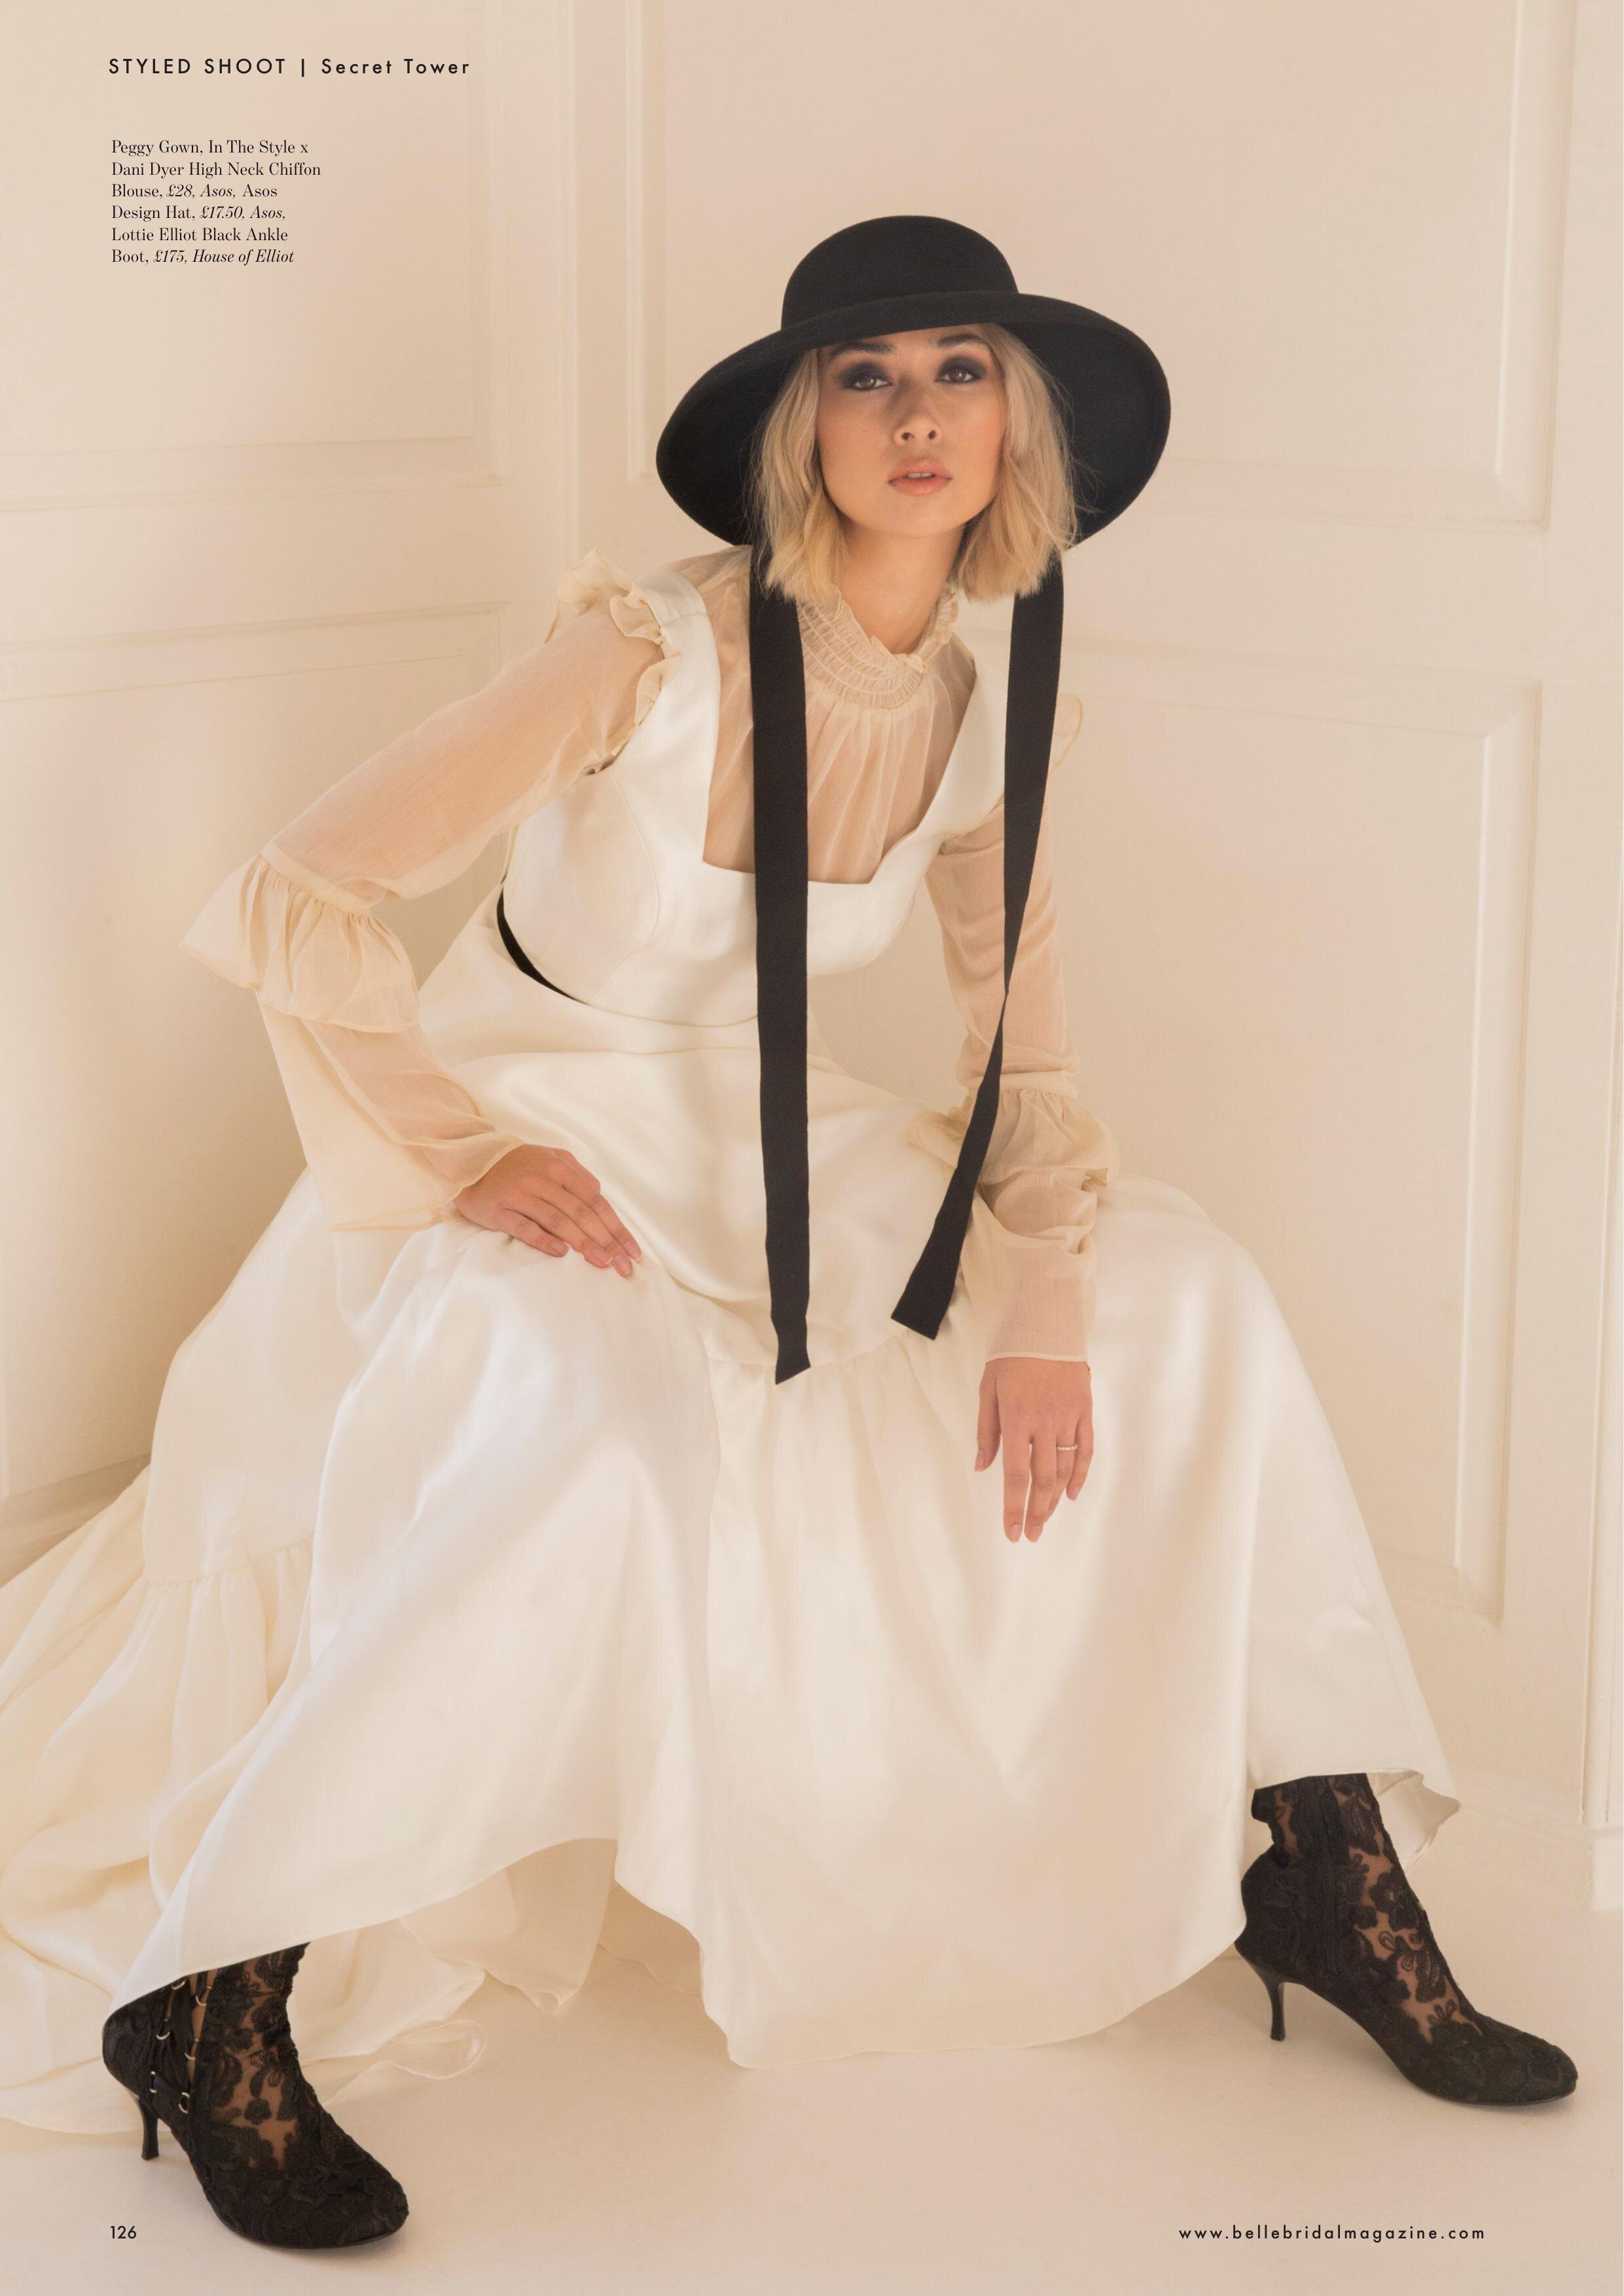 Belle Bridal Secret Tower - Crouching with black boots and hat.jpg